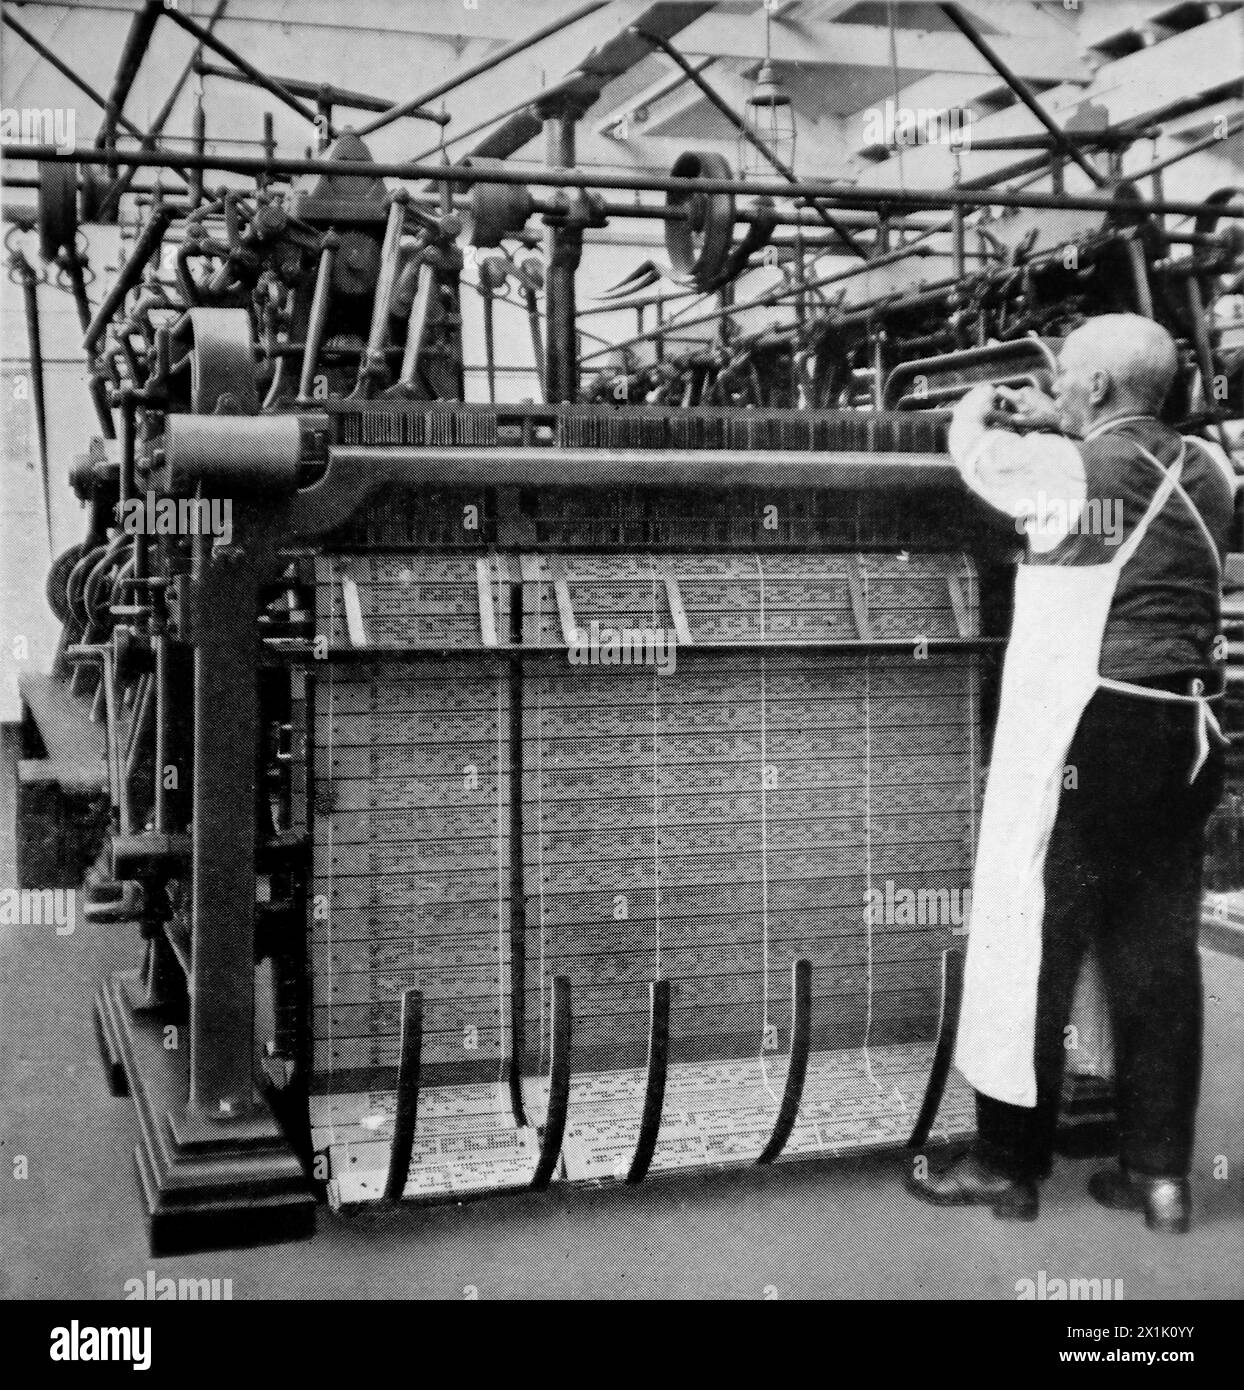 The Jacquard, the thread-controlling mechanism. This was published in 1924 by The Federation of Lace and Embroidery Employers’ Associations, Nottingham, for the British Empire Exhibition. Stock Photo